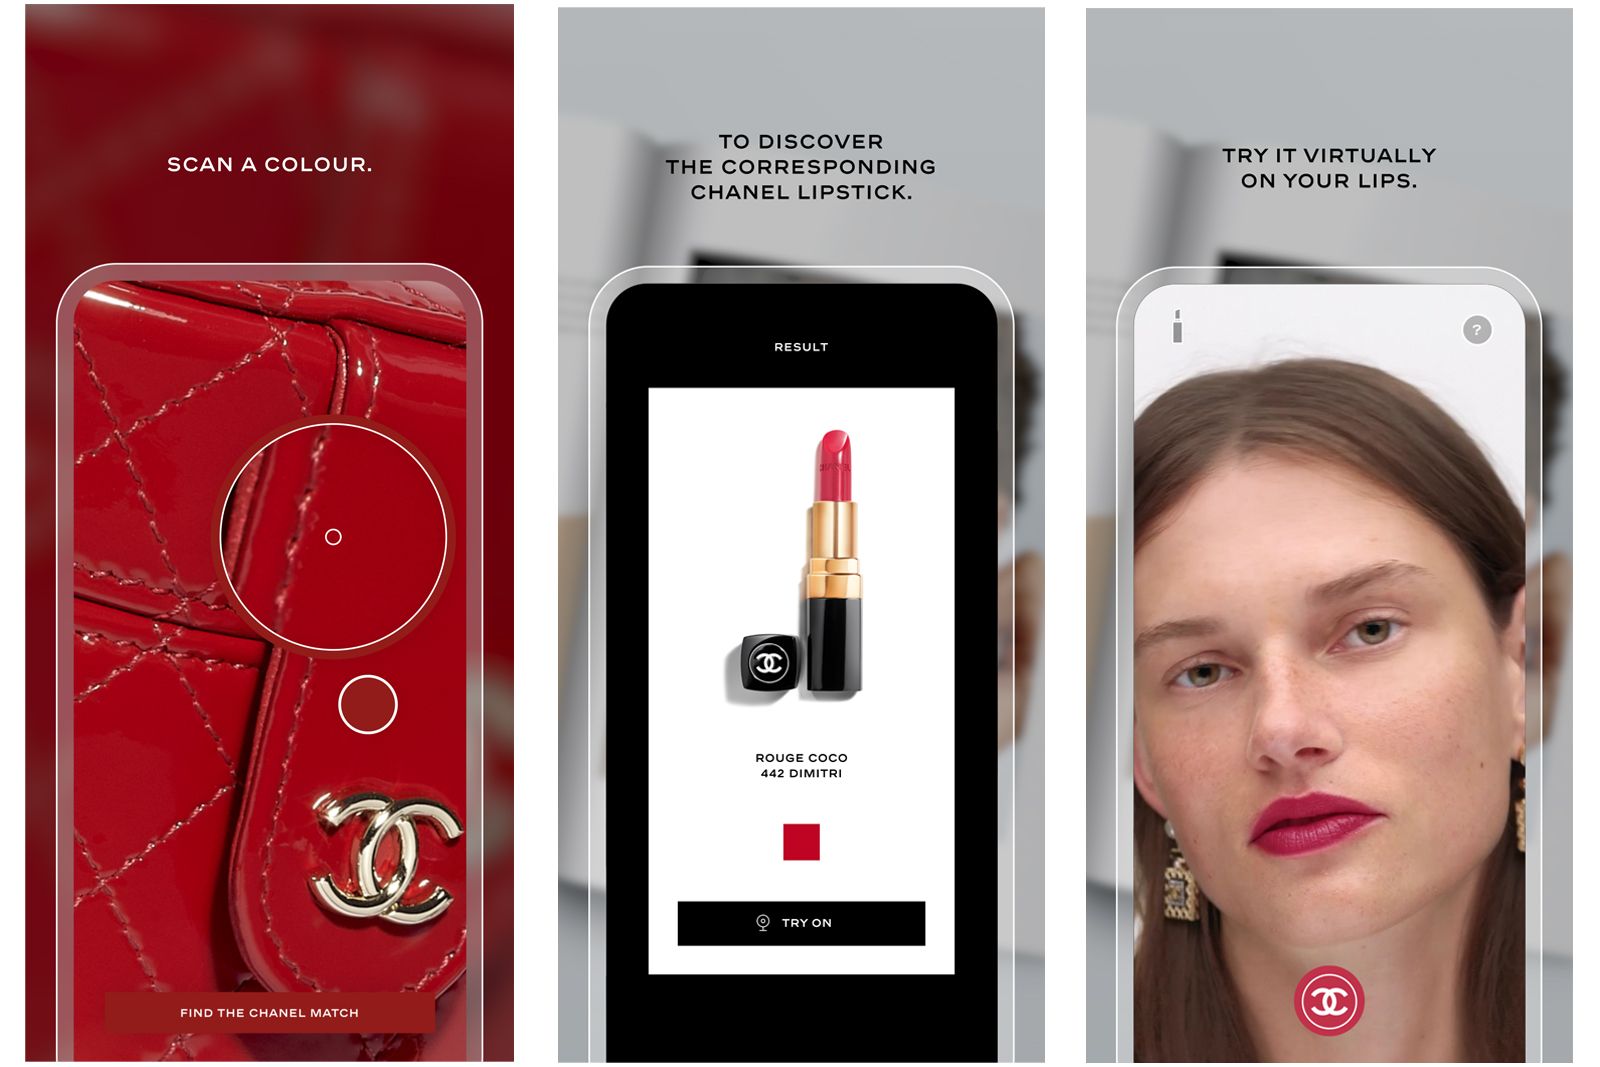 Chanel Lipscanner app will let you find a lipstick from any physical or digital image photo 1